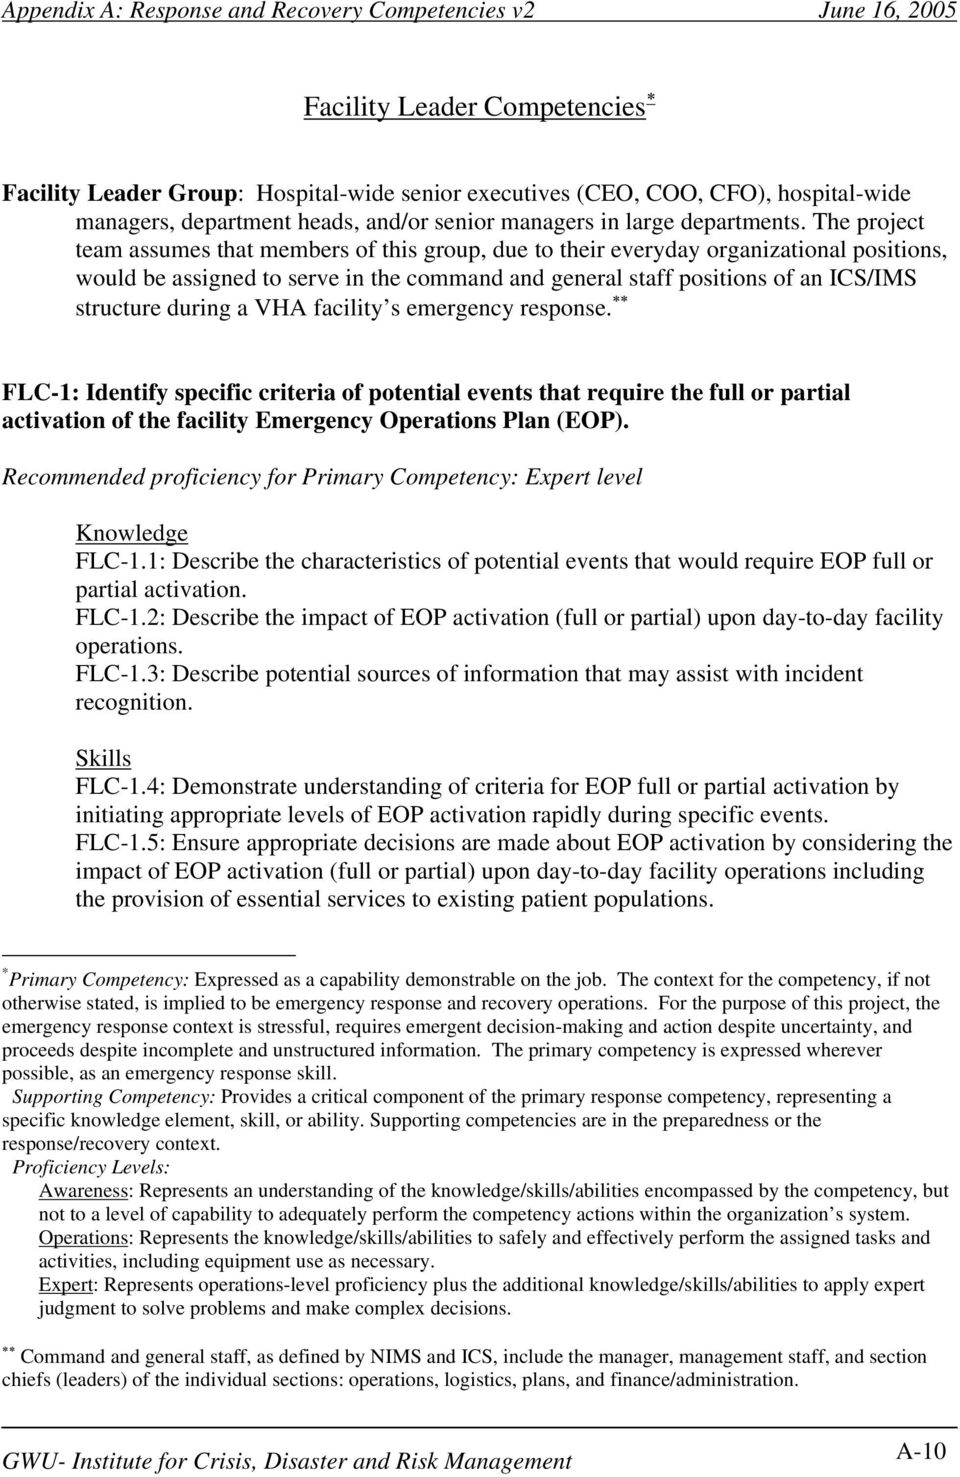 during a VHA facility s emergency response. FLC-1: Identify specific criteria of potential events that require the full or partial activation of the facility Emergency Operations Plan (EOP).